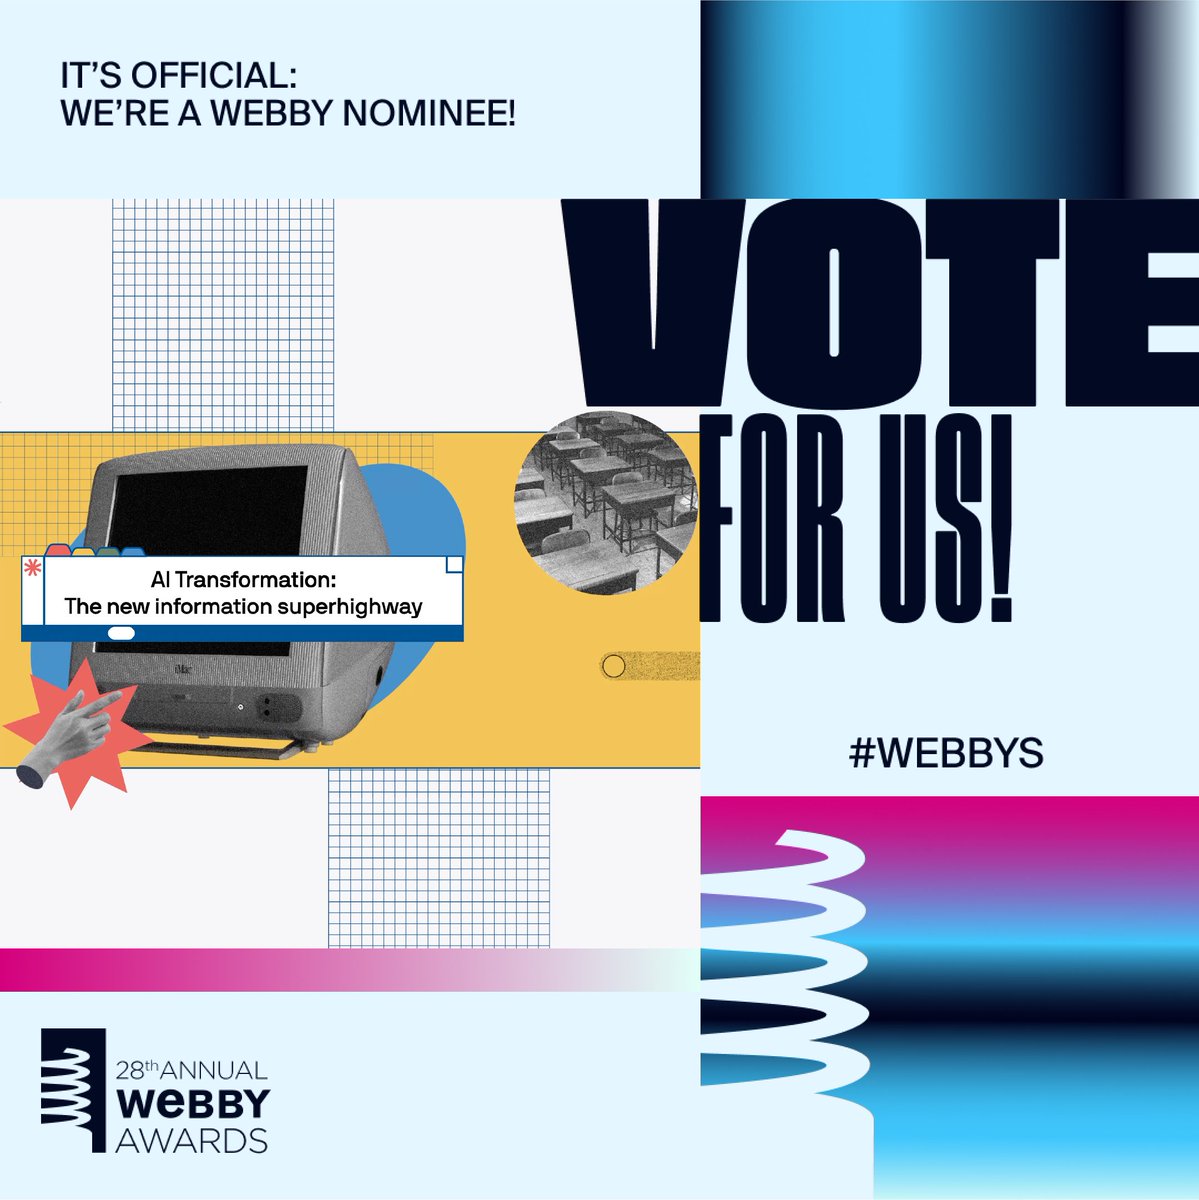 🏆 1 big thing: Axios has been nominated for a Webby Award for our video series AI: The Information Superhighway! Vote for us here: vote.webbyawards.com/PublicVoting#/…